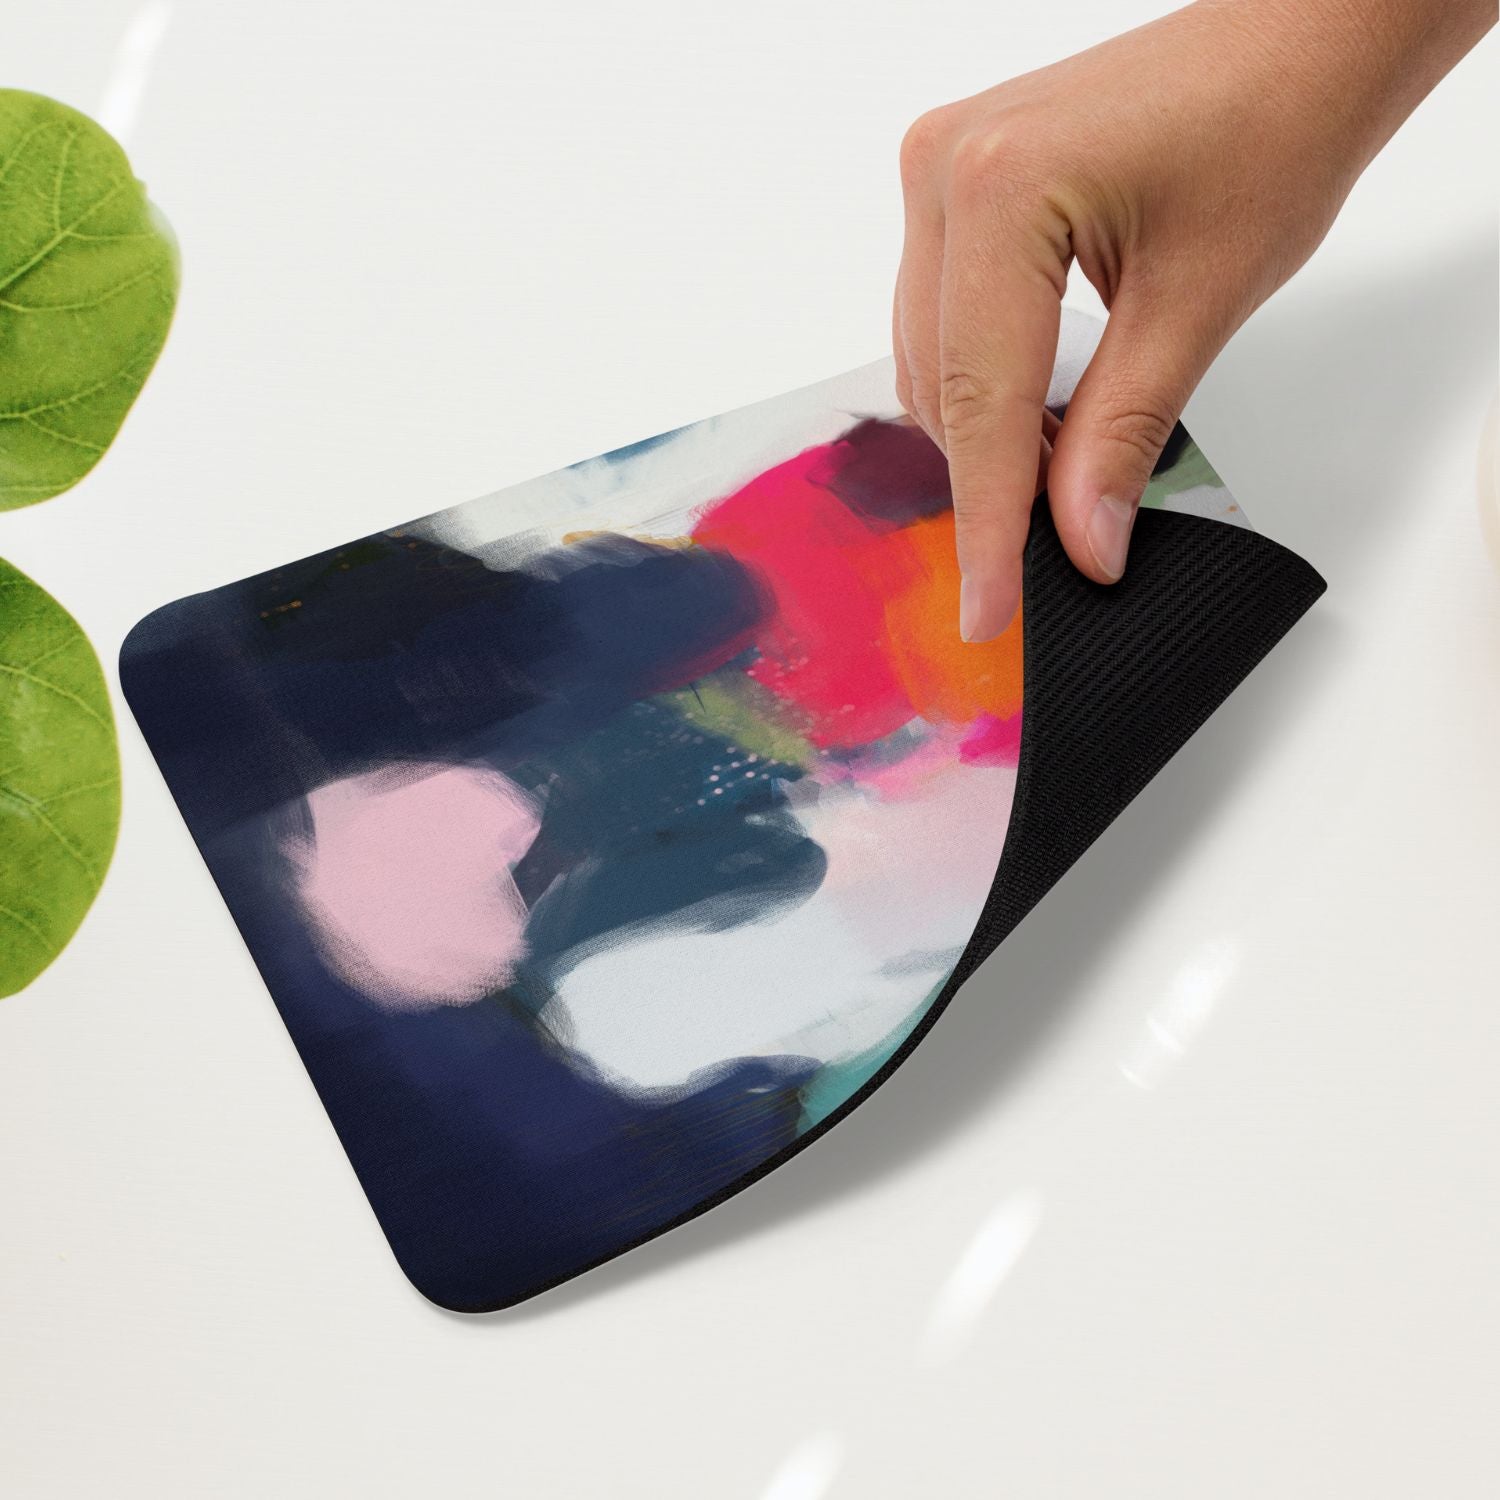 Eliza, colorful mouse pad for styling your office desk. Featuring artwork by Parima Studio. Home office styling accessories, cubicle styling accessories.